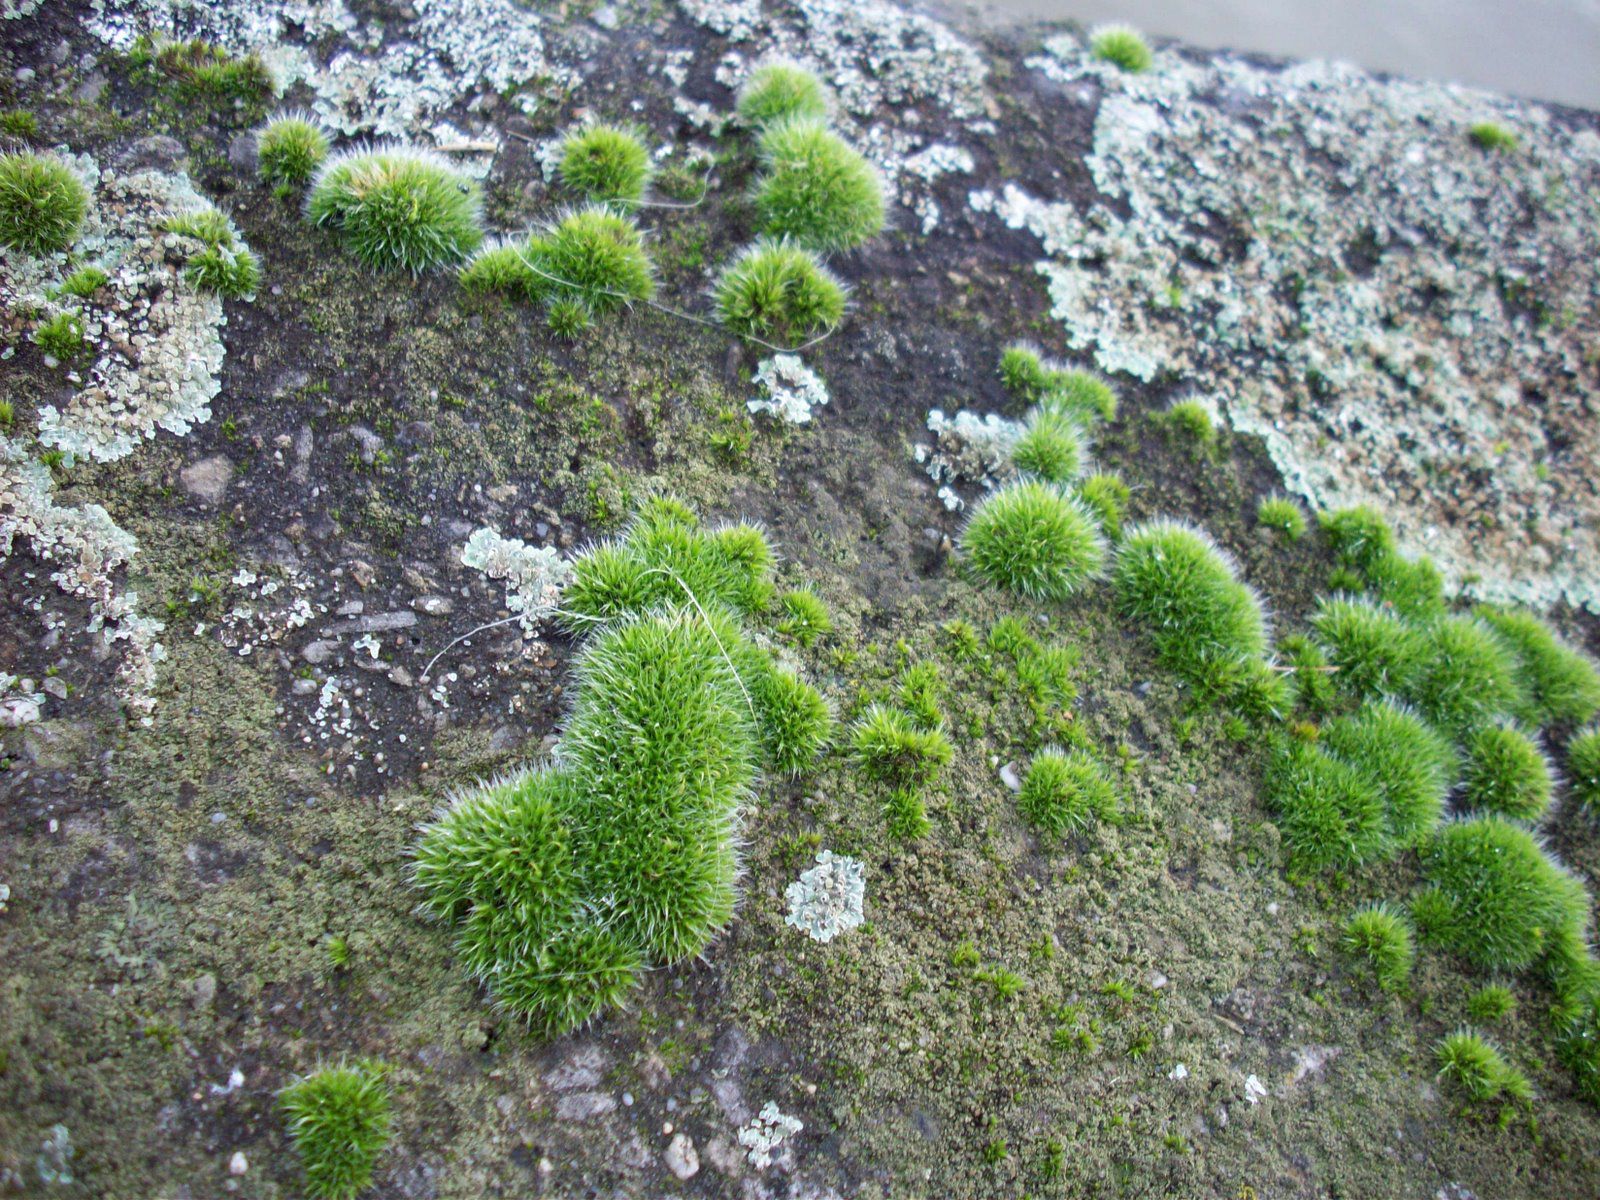 These lichen and mosses are colonising a new environment: a concrete block. © Jacques Bertrand CC by-nc-nd 3.0